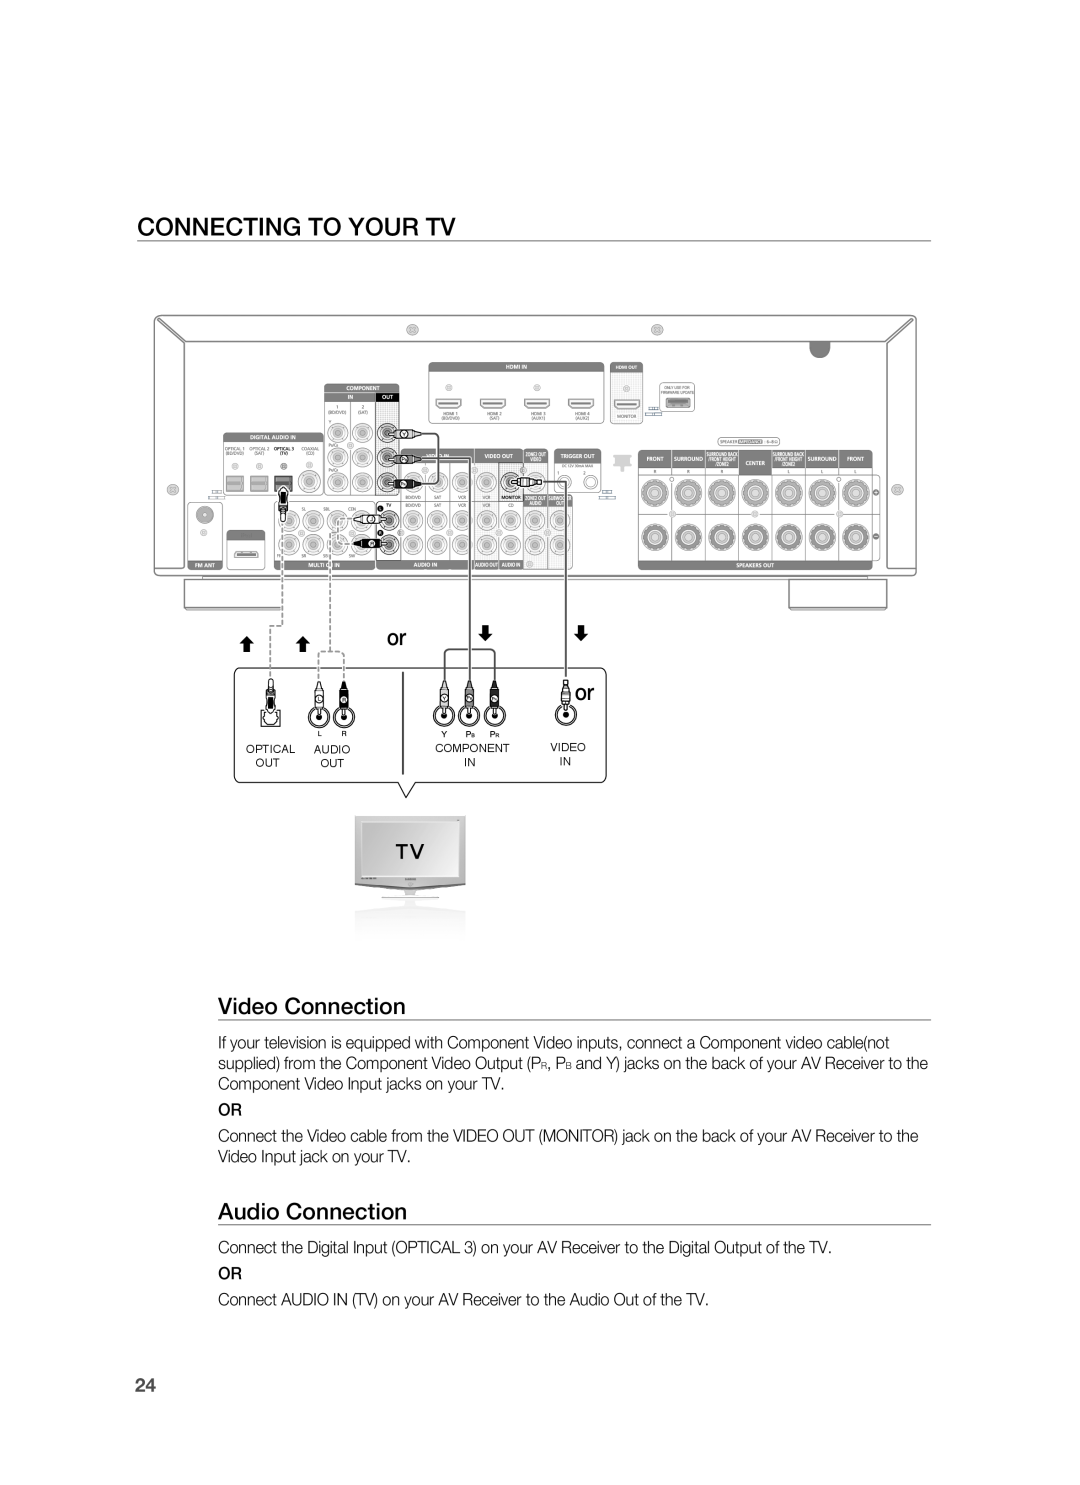 Samsung HW-C900-XAA user manual Connecting To Your Tv, Video Connection, Audio Connection 